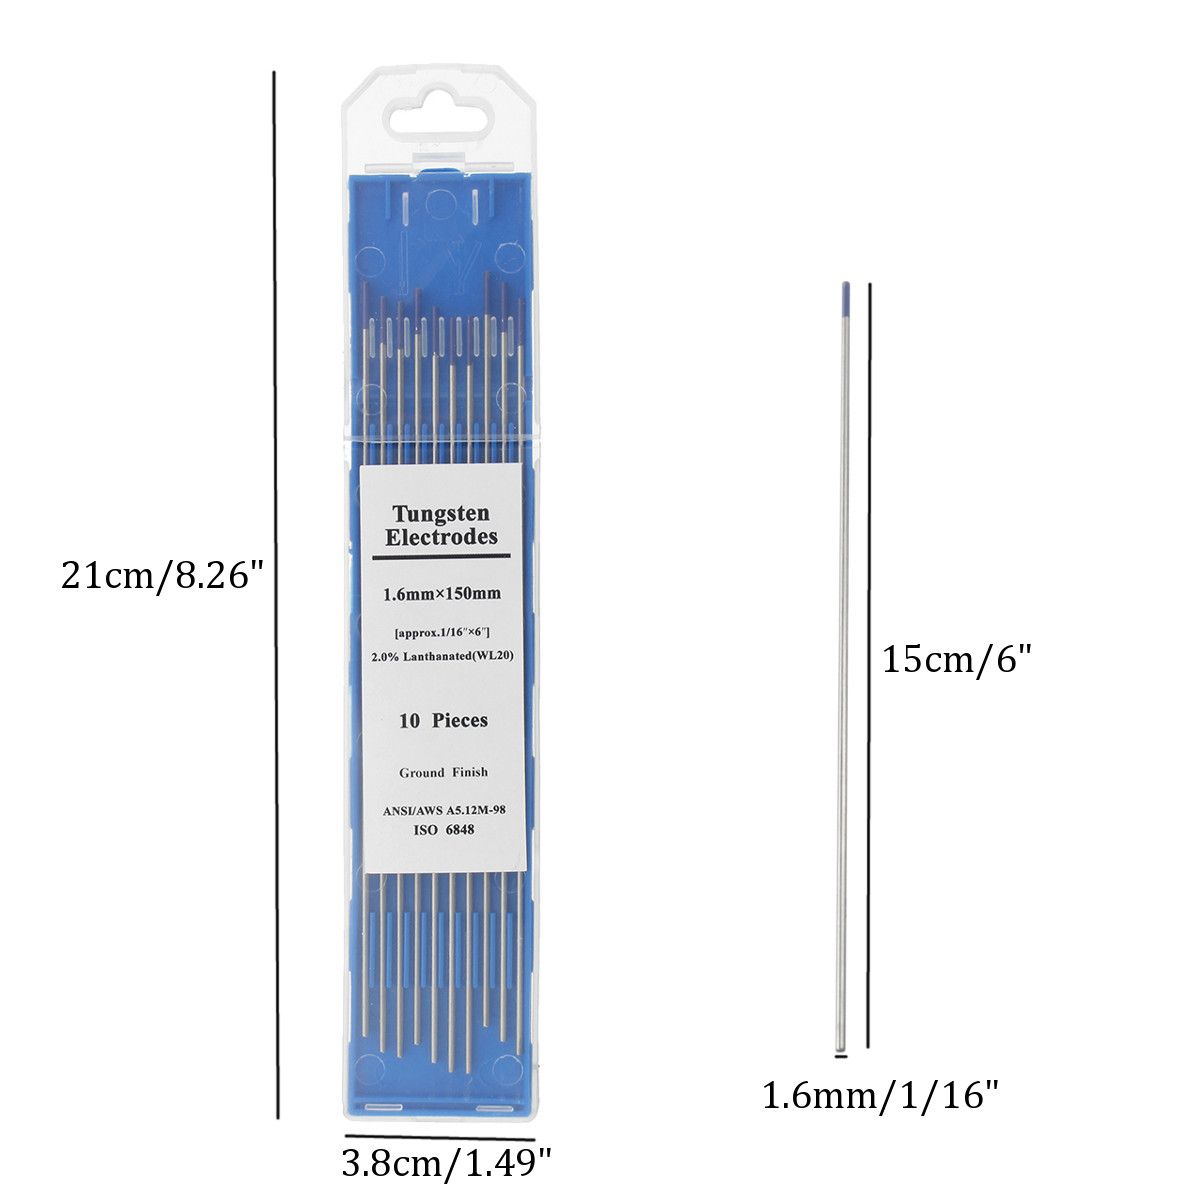 10Pcs-TIG-Welding-Tungsten-Electrodes-2-Lanthanated-116quot-x-6quot-Blue-Tip-WL20-Assorted-Welding-R-1363092